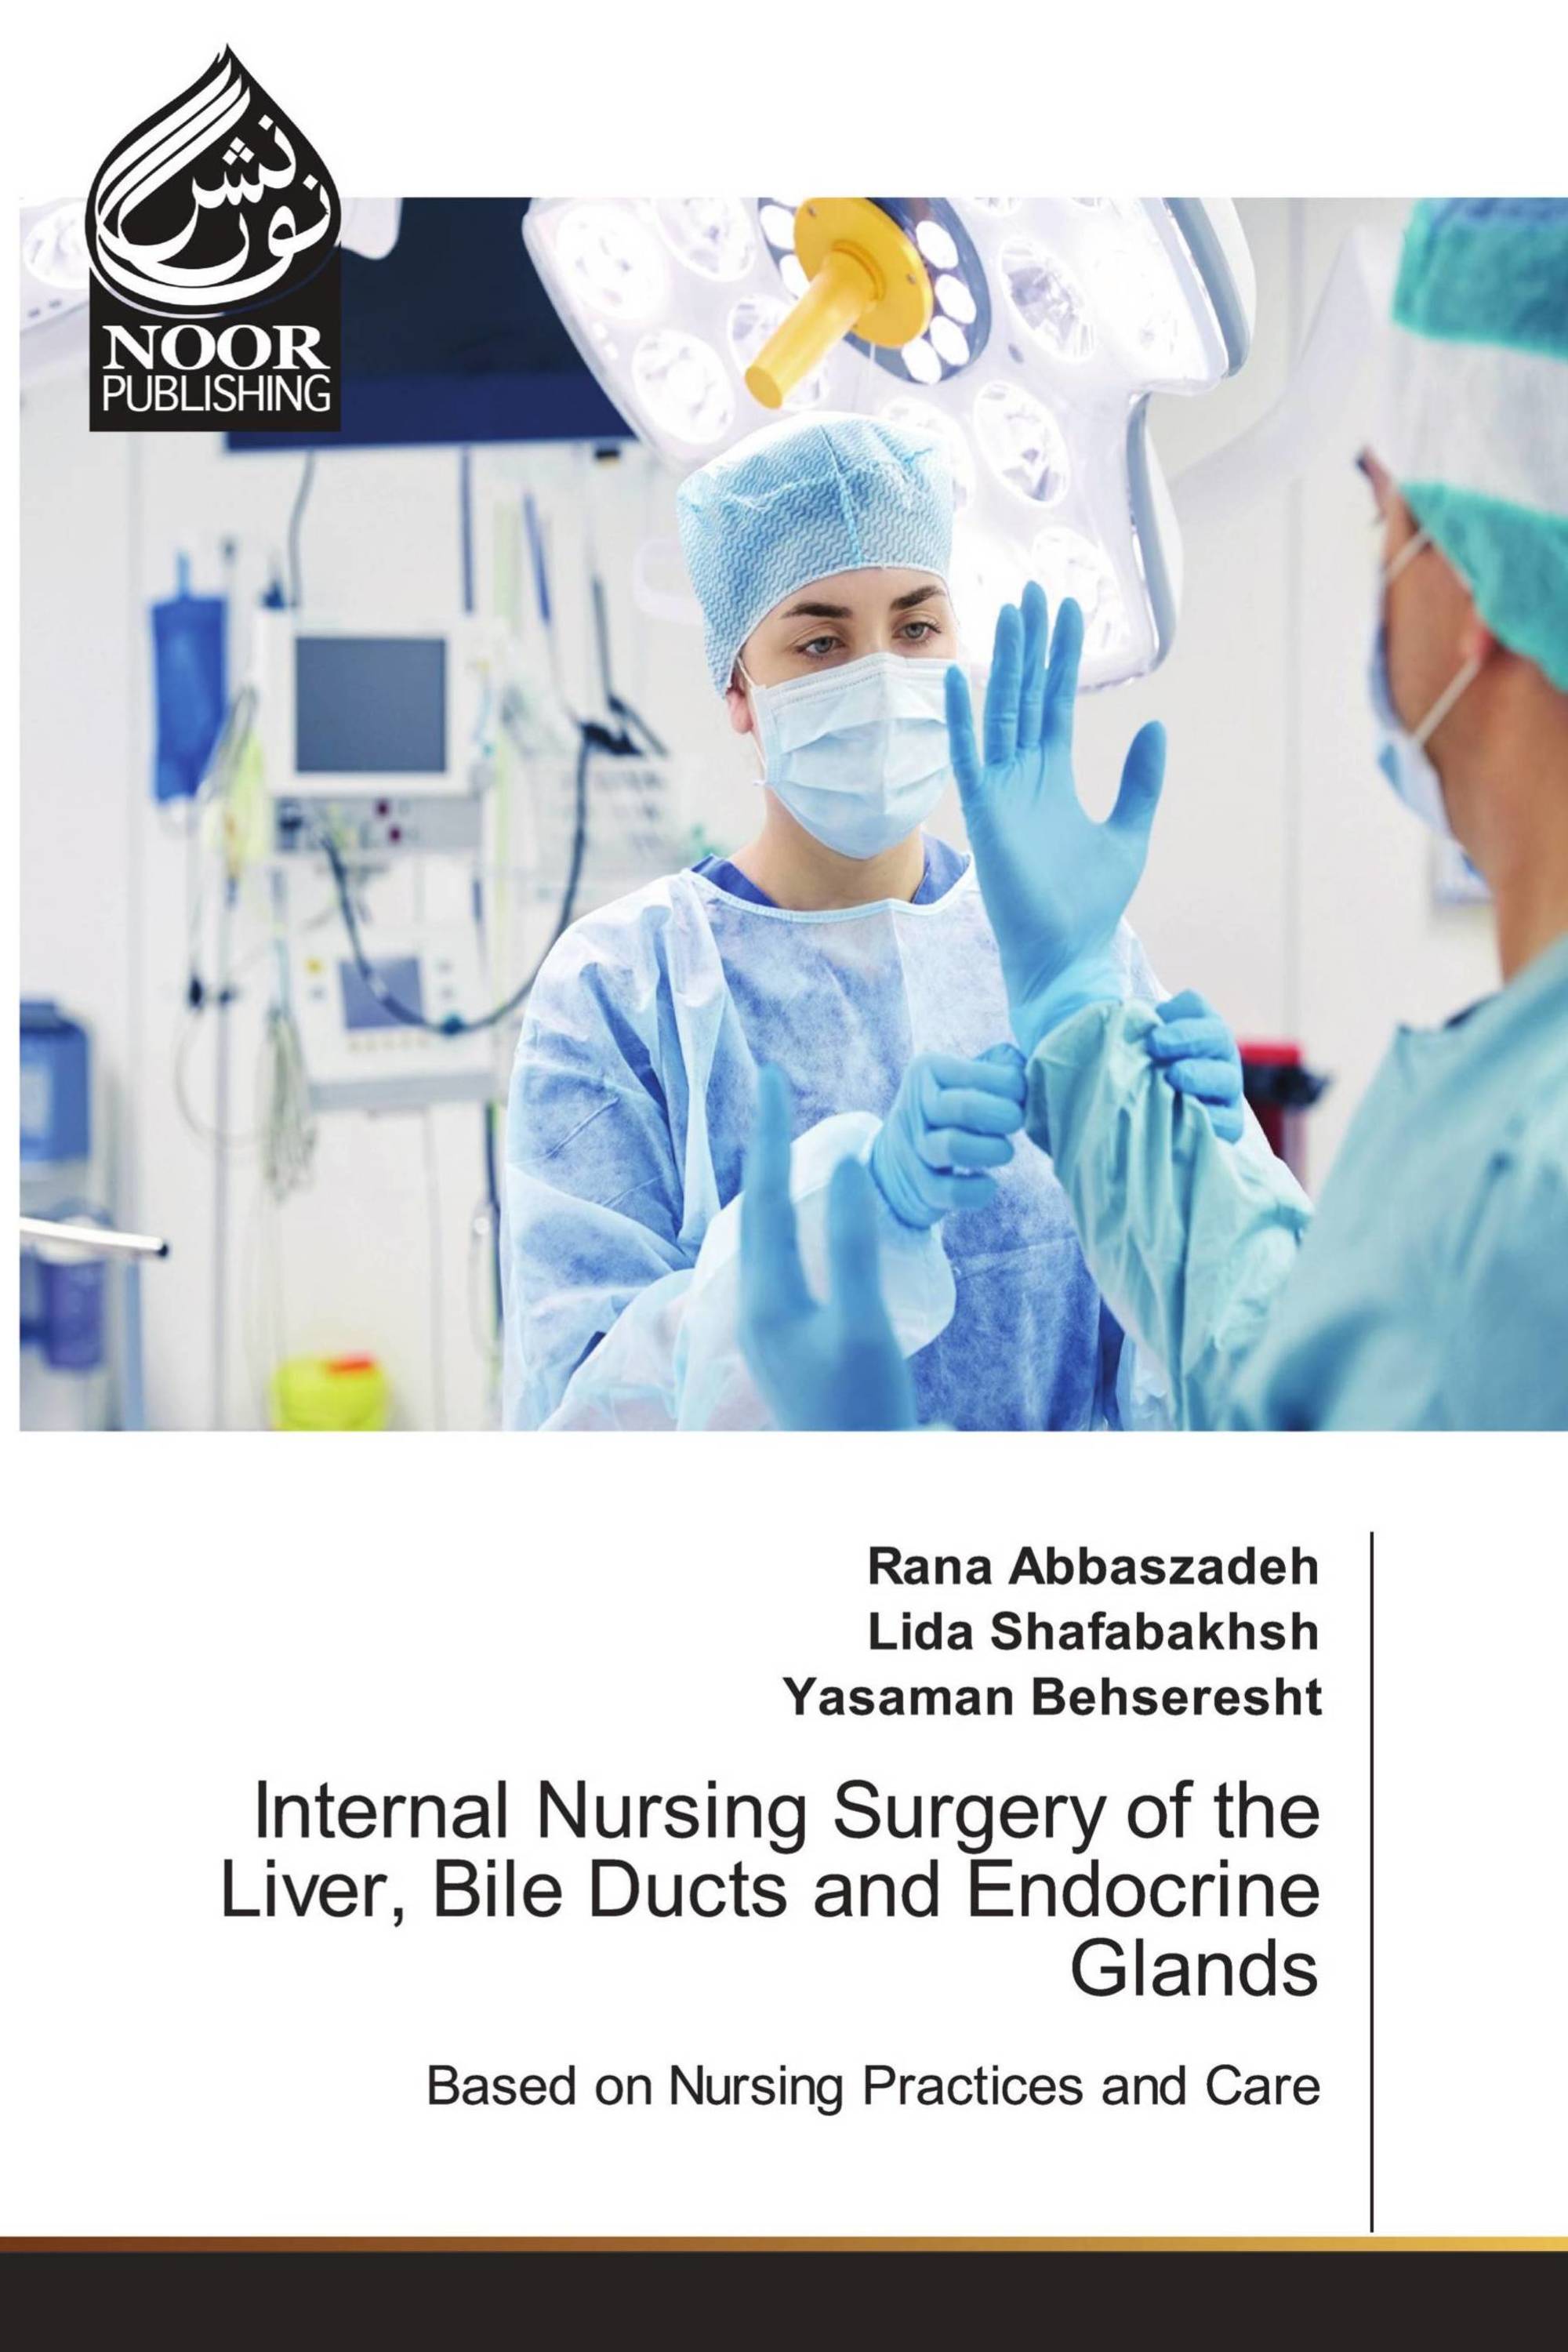 Internal Nursing Surgery of the Liver, Bile Ducts and Endocrine Glands